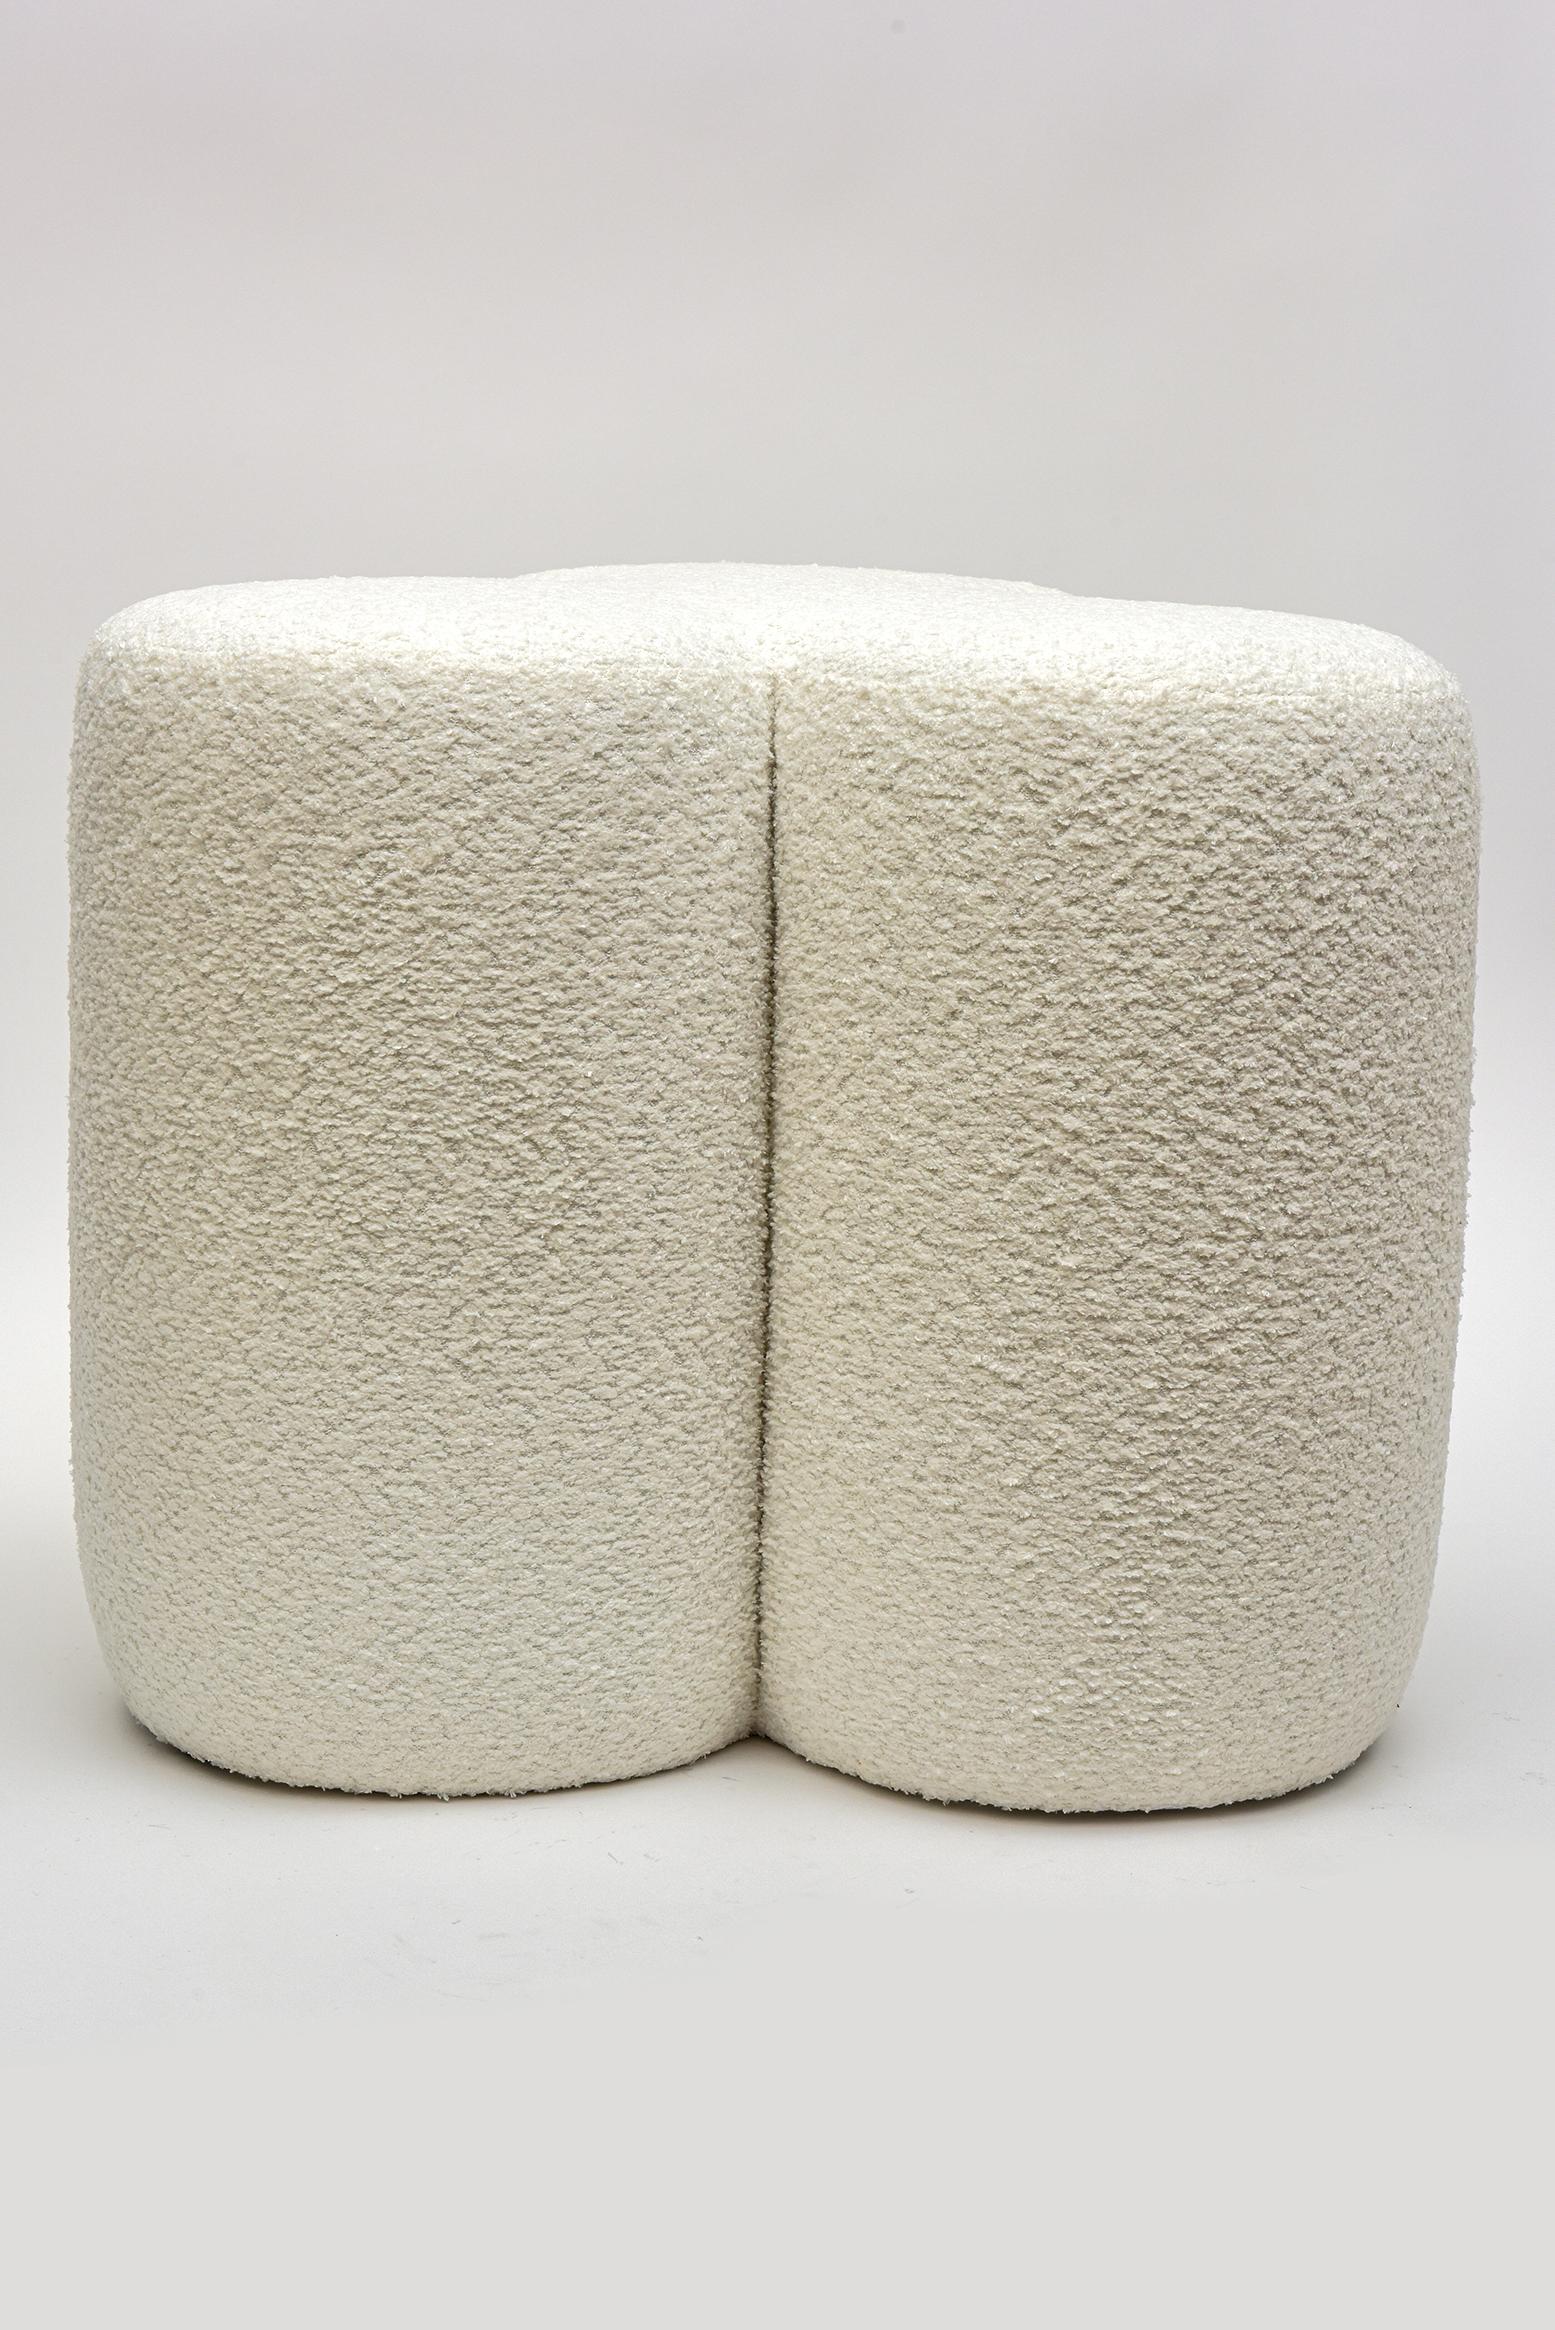 Modern Custom Made Limited Edition Ottomans or Benches With Off White Boucle Upholstery For Sale